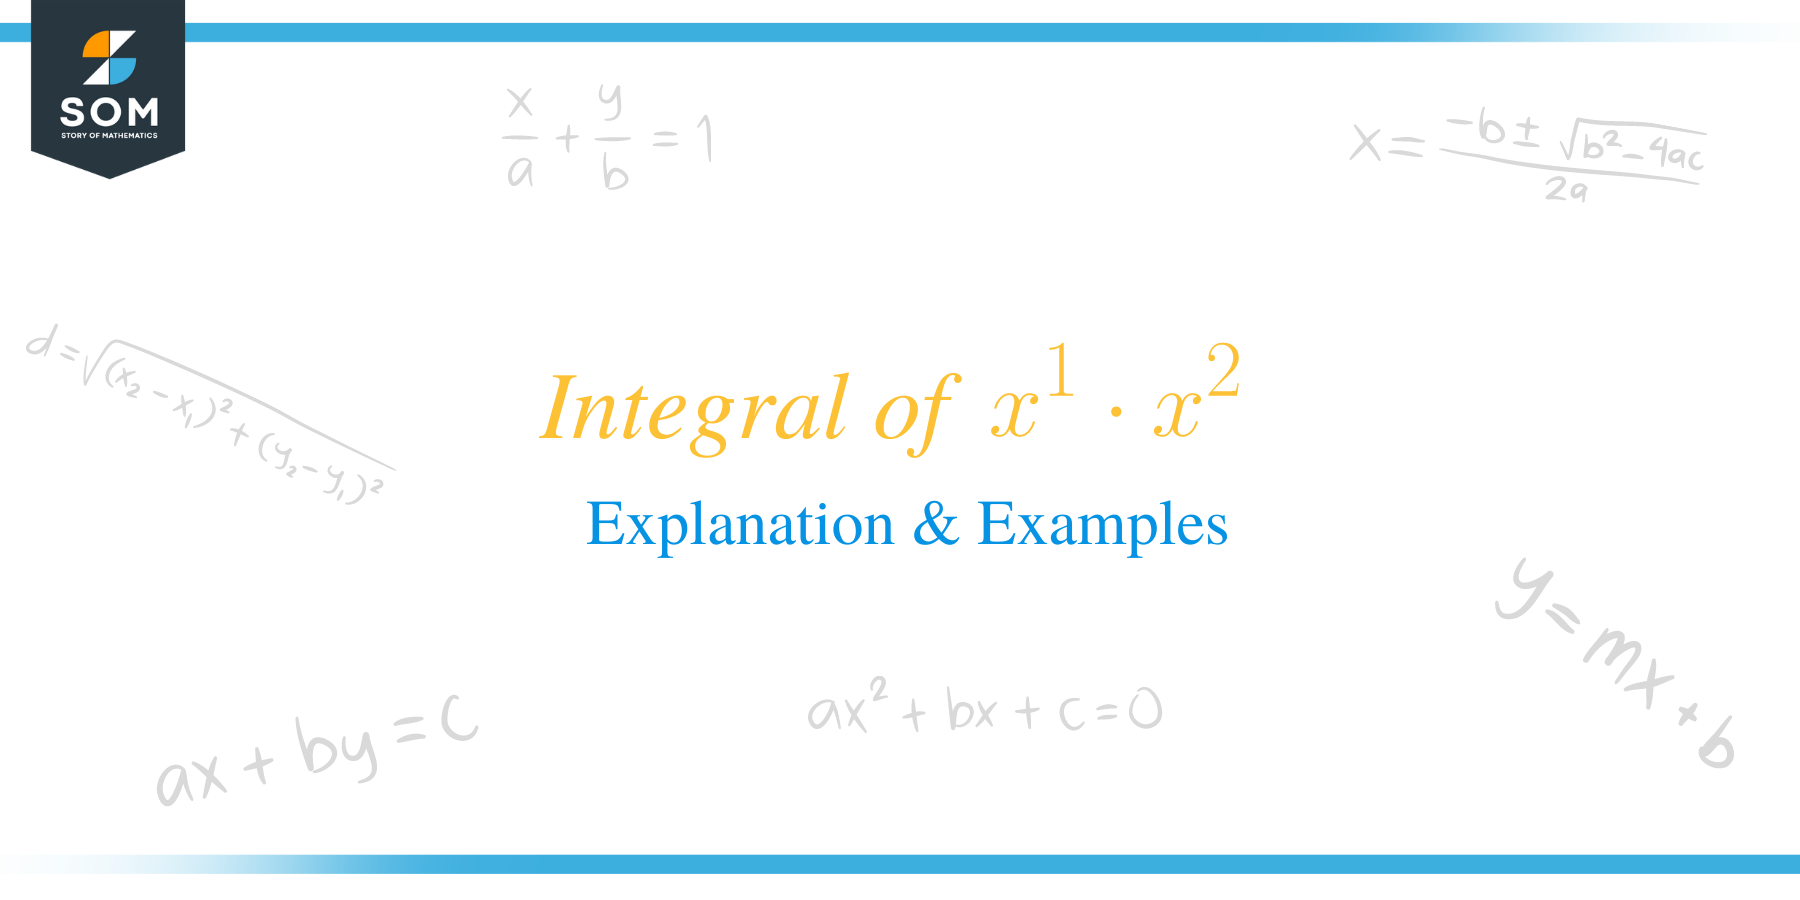 Integral of x1x2 title